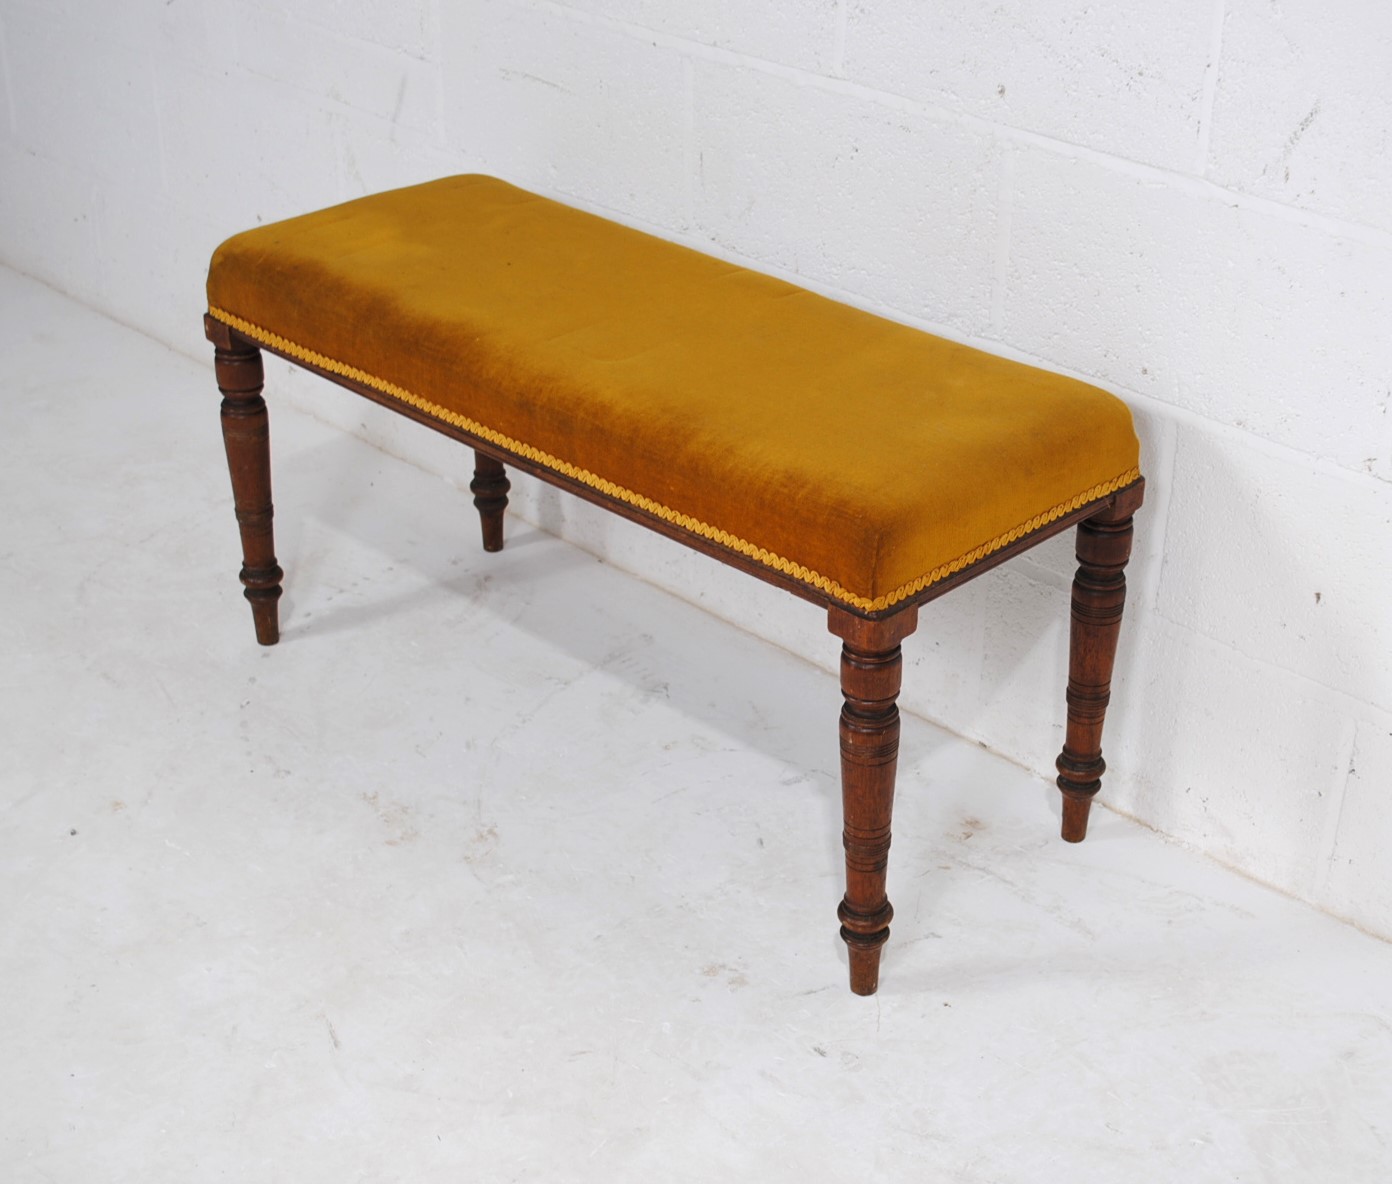 A Victorian upholstered duet stool, raised on turned mahogany legs - length 99cm, height 51cm - Image 2 of 5